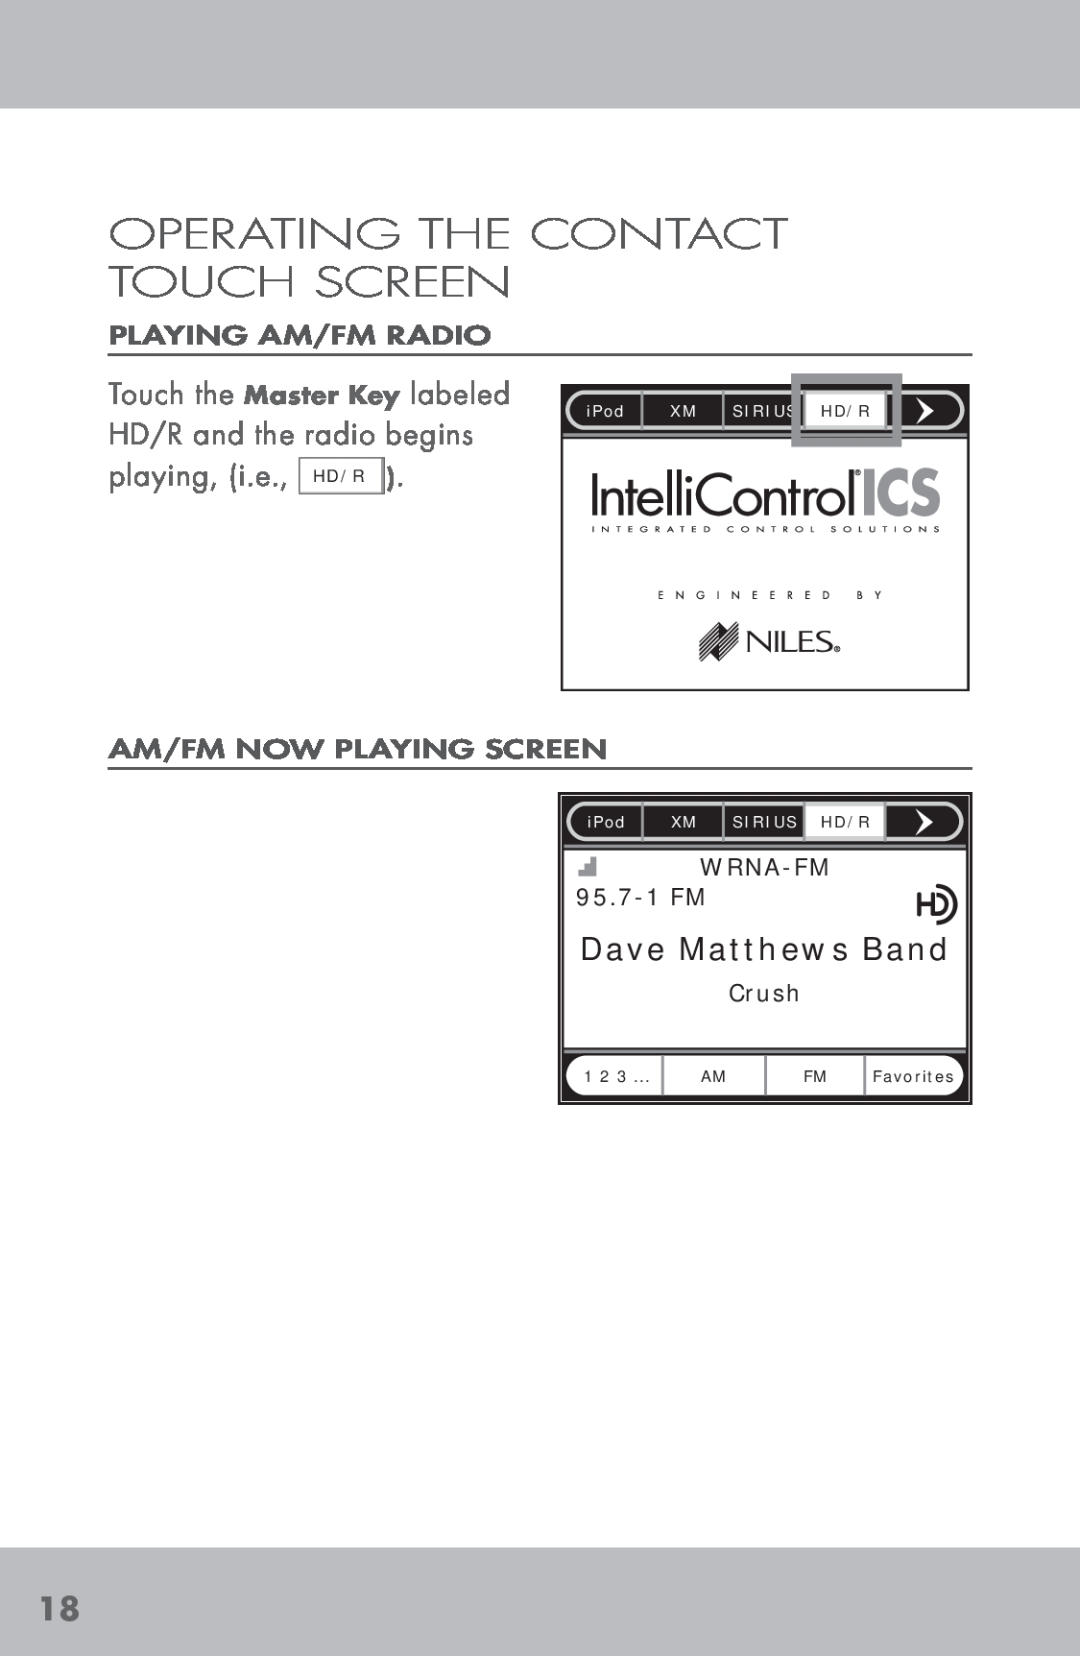 Niles Audio TM-HD/R Operating The Contact Touch Screen, Dave Matthews Band, Playing Am/Fm Radio, Am/Fm Now Playing Screen 